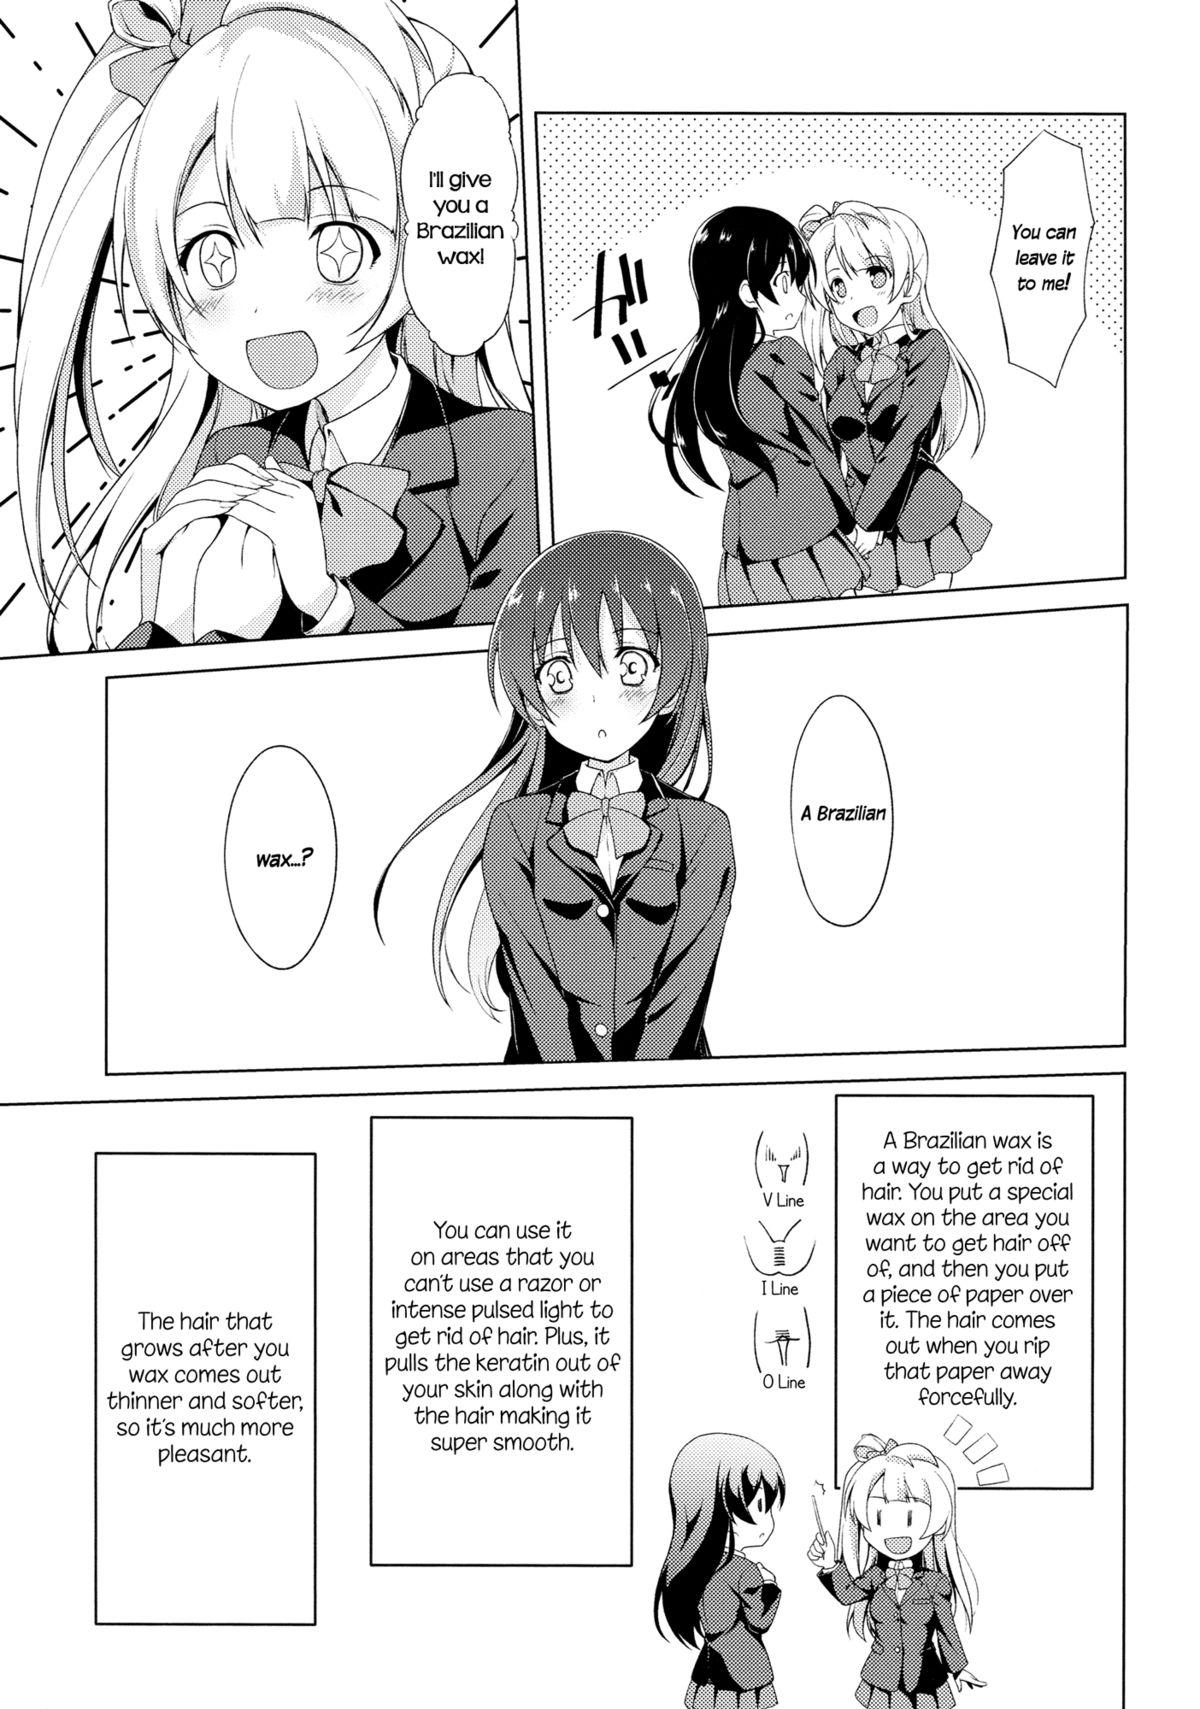 Hot Couple Sex Marshmallow Mischief + Macaron Temptation | Marshmallow Mischief & Macaroon Affection - Love live Gym - Page 4